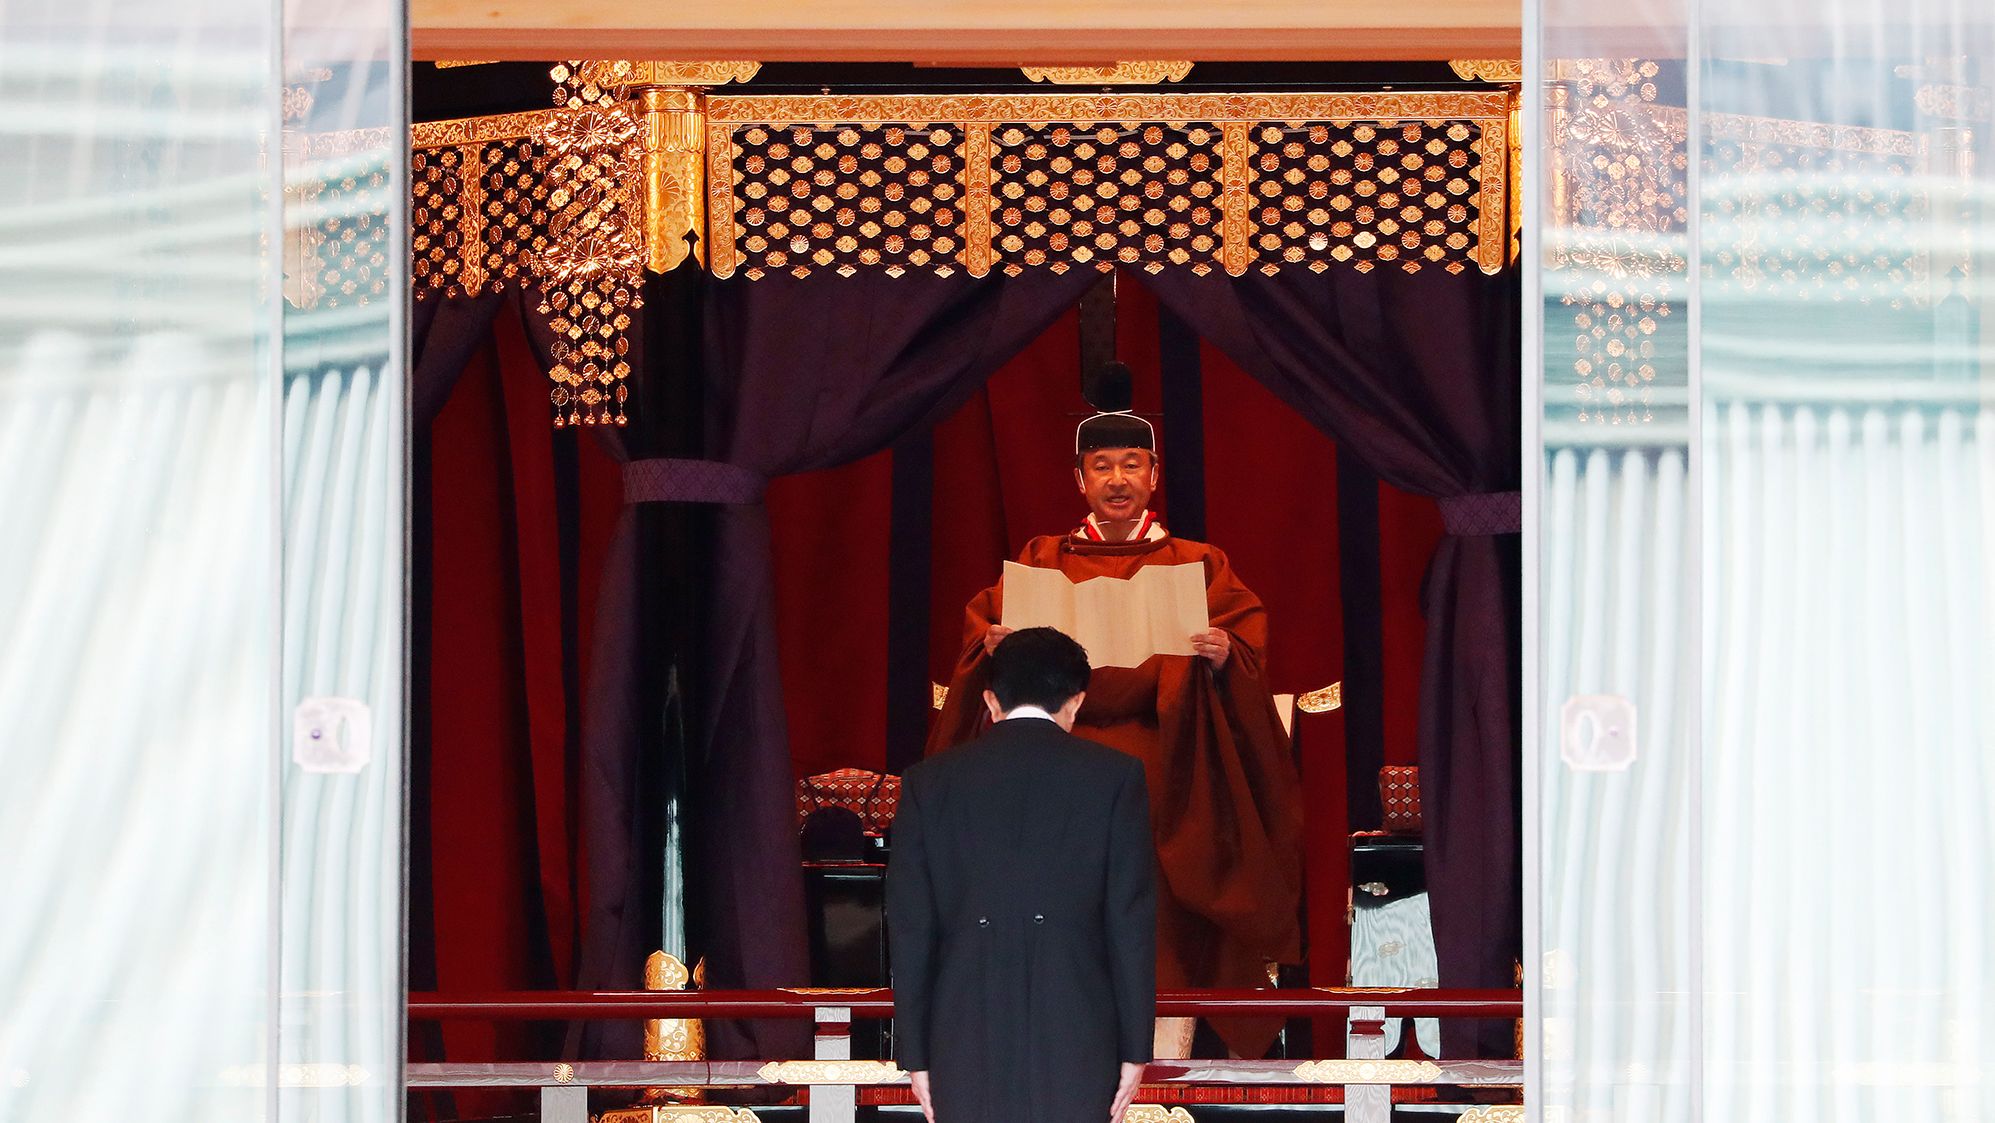 Japan's Emperor Naruhito proclaims his enthronement to the world at the Imperial Palace on Tuesday, October 22 in Tokyo, Japan.